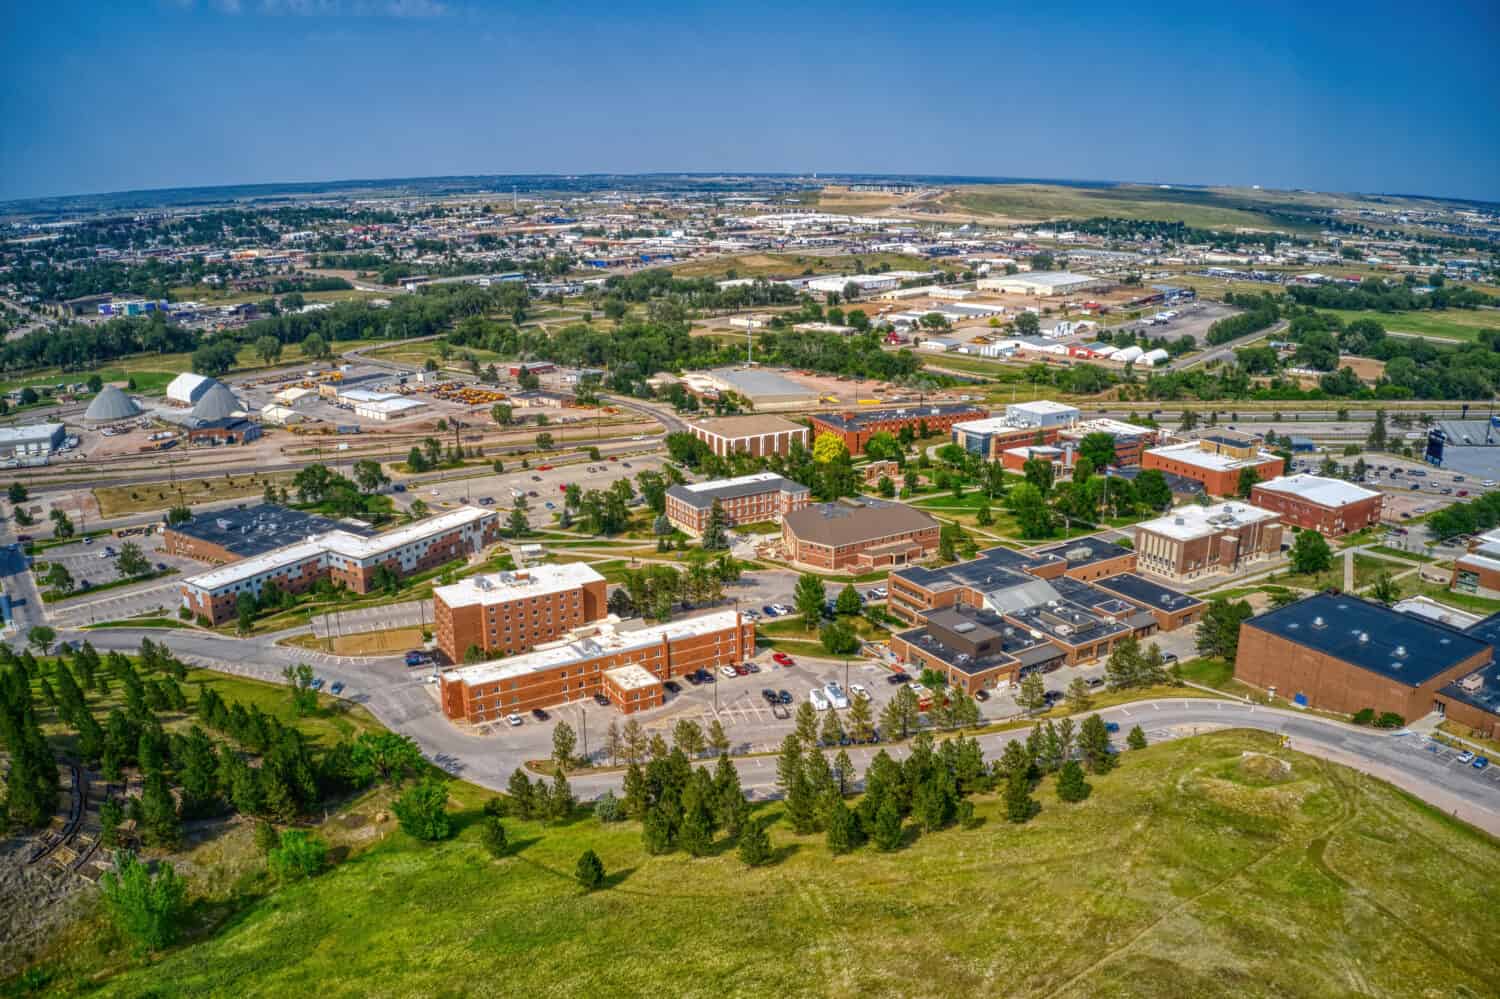 Aerial View of a University in Rapid City, South Dakota during Summer